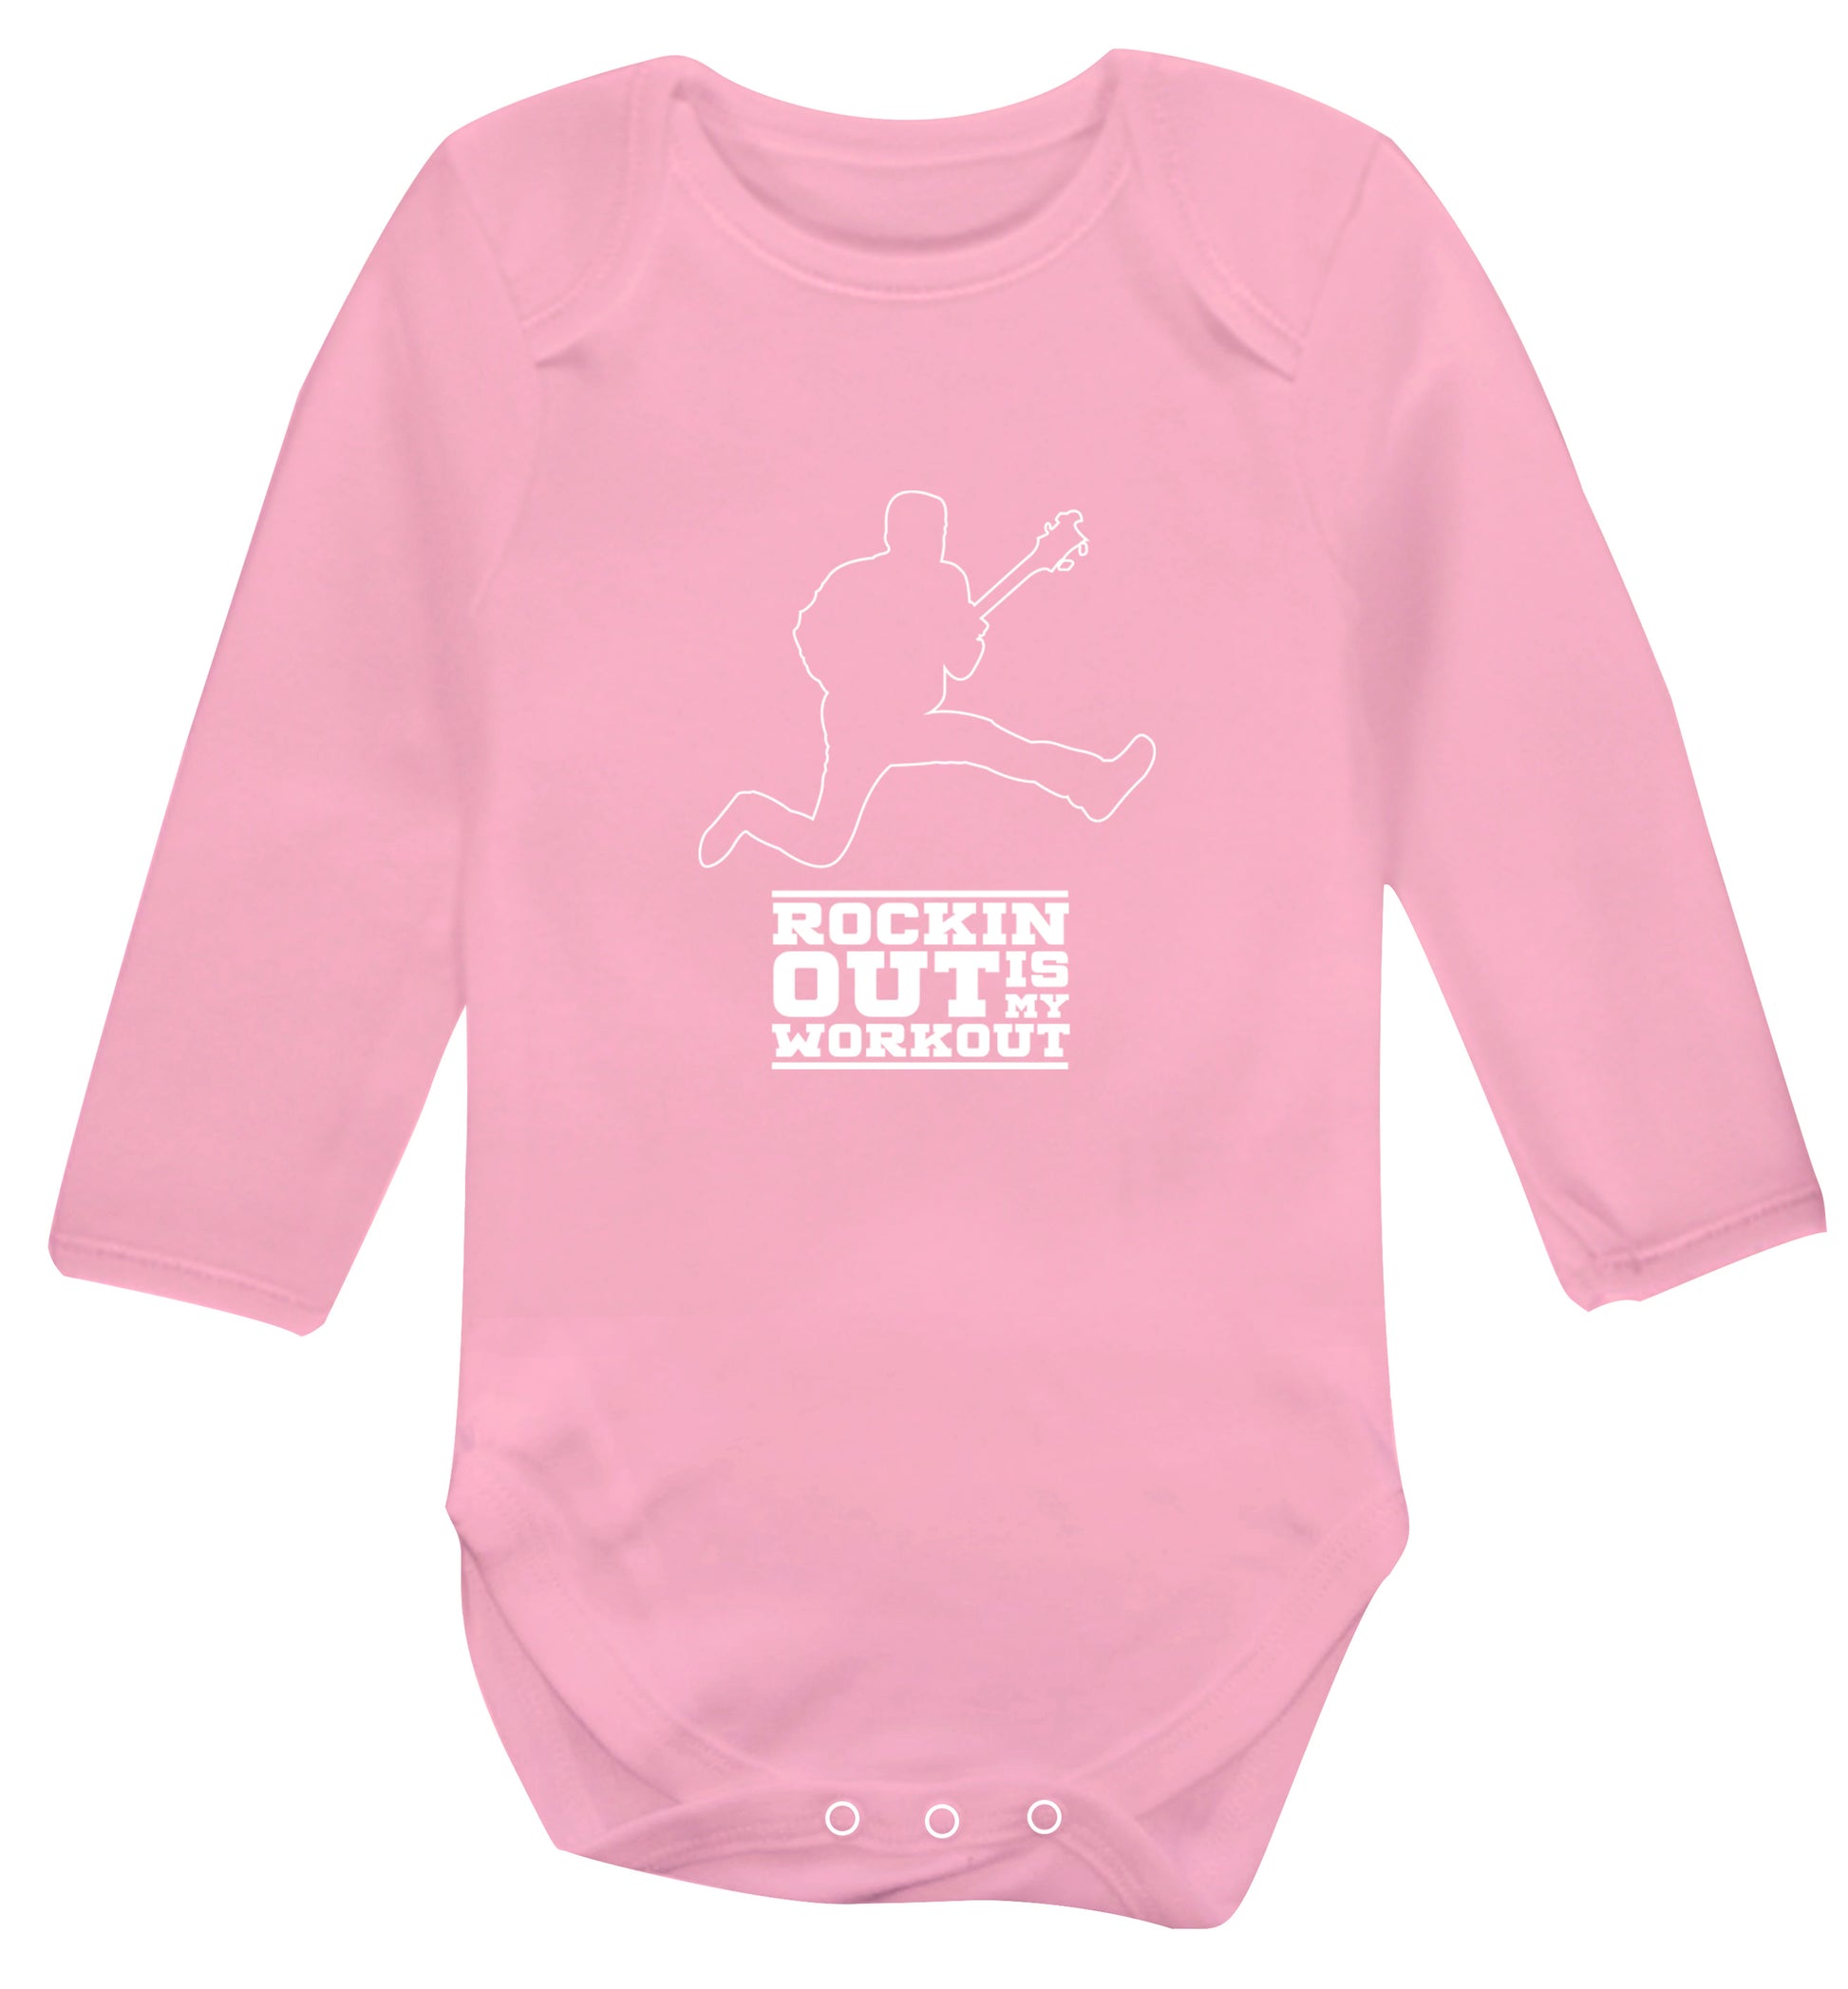 Rockin out is my workout 2 Baby Vest long sleeved pale pink 6-12 months